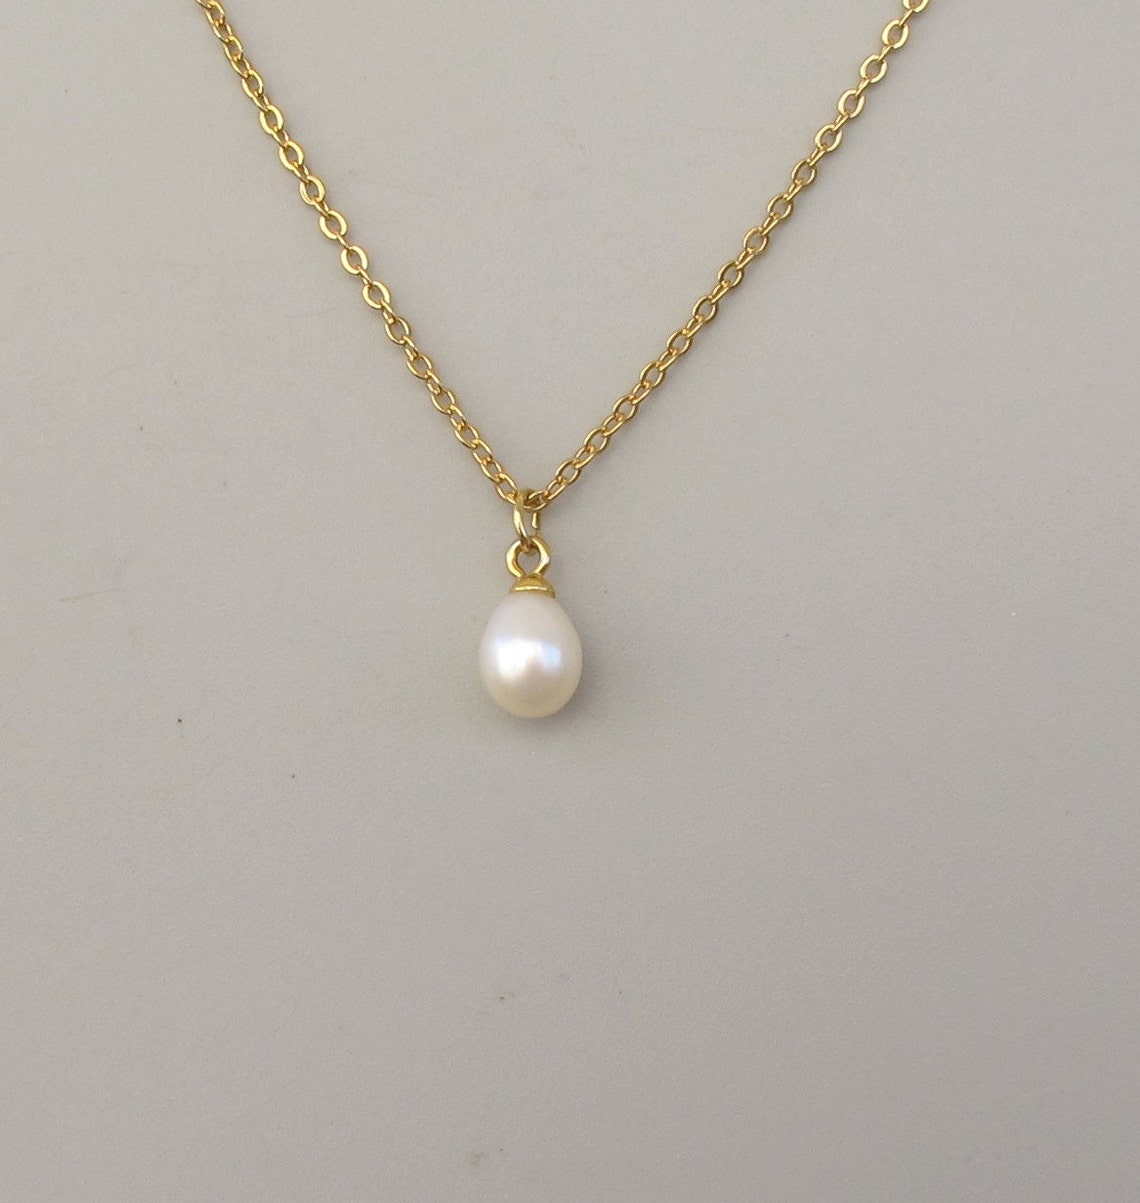 Tear drop pearl necklace white natural large pearl gold | Etsy